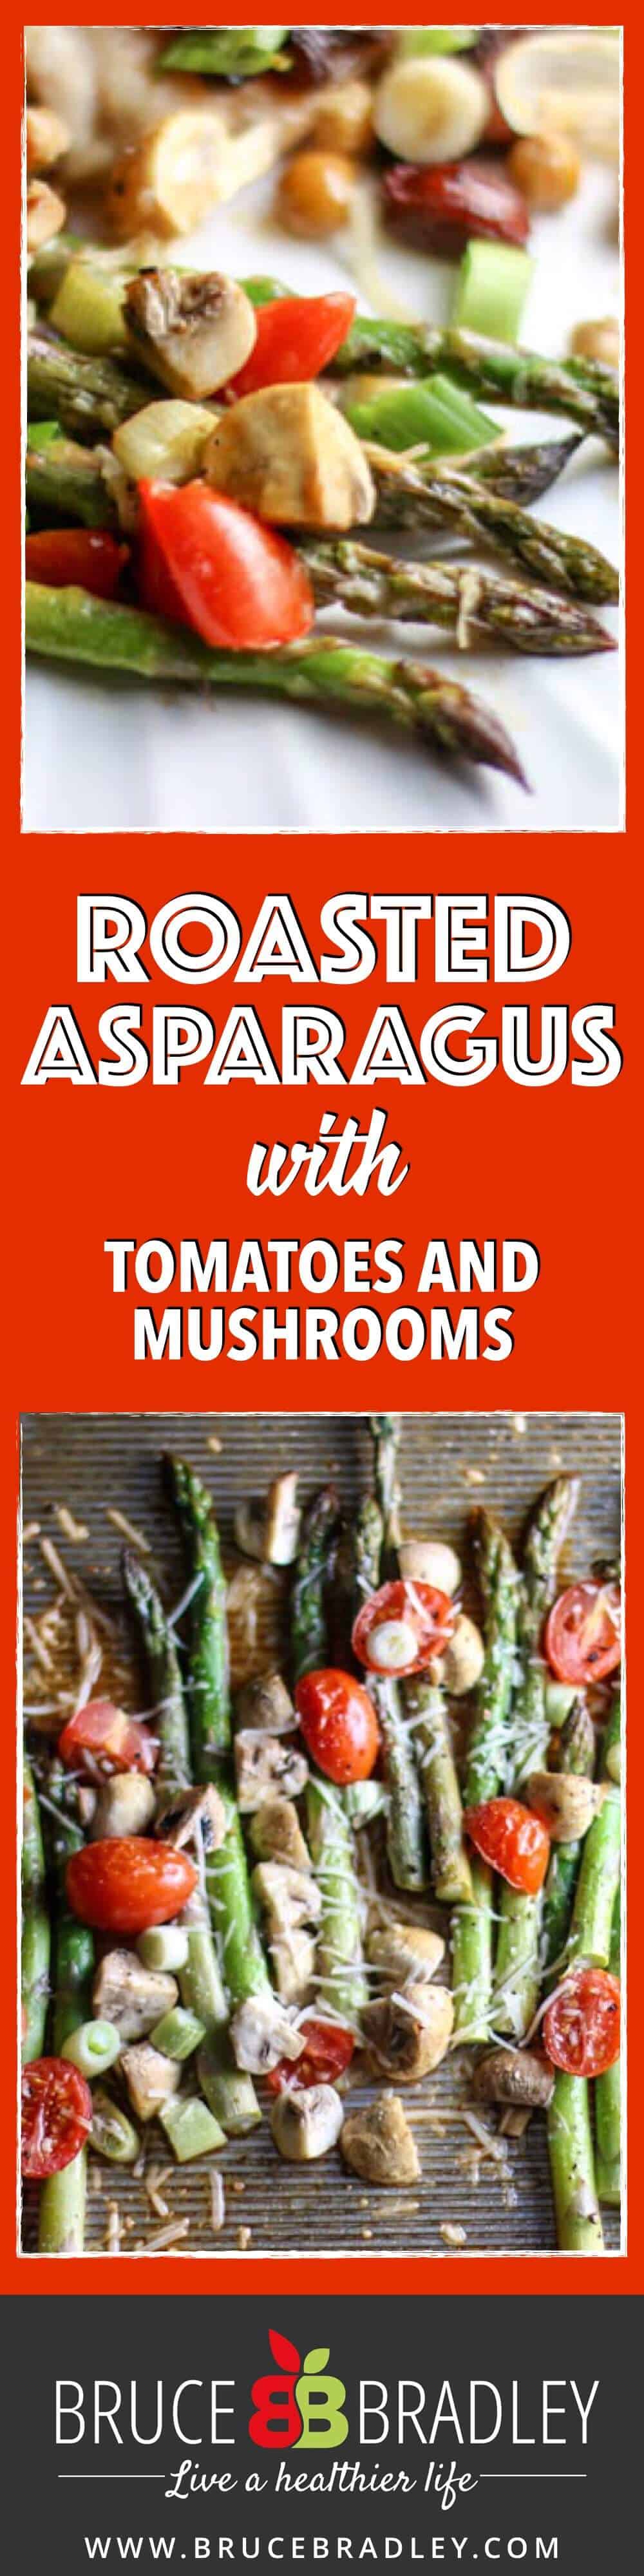 Want A Side Dish That Looks Like It Took Hours To Prepare, But Only Took Minutes? Then Try My Delicious Roasted Asparagus With Tomatoes And Mushrooms!